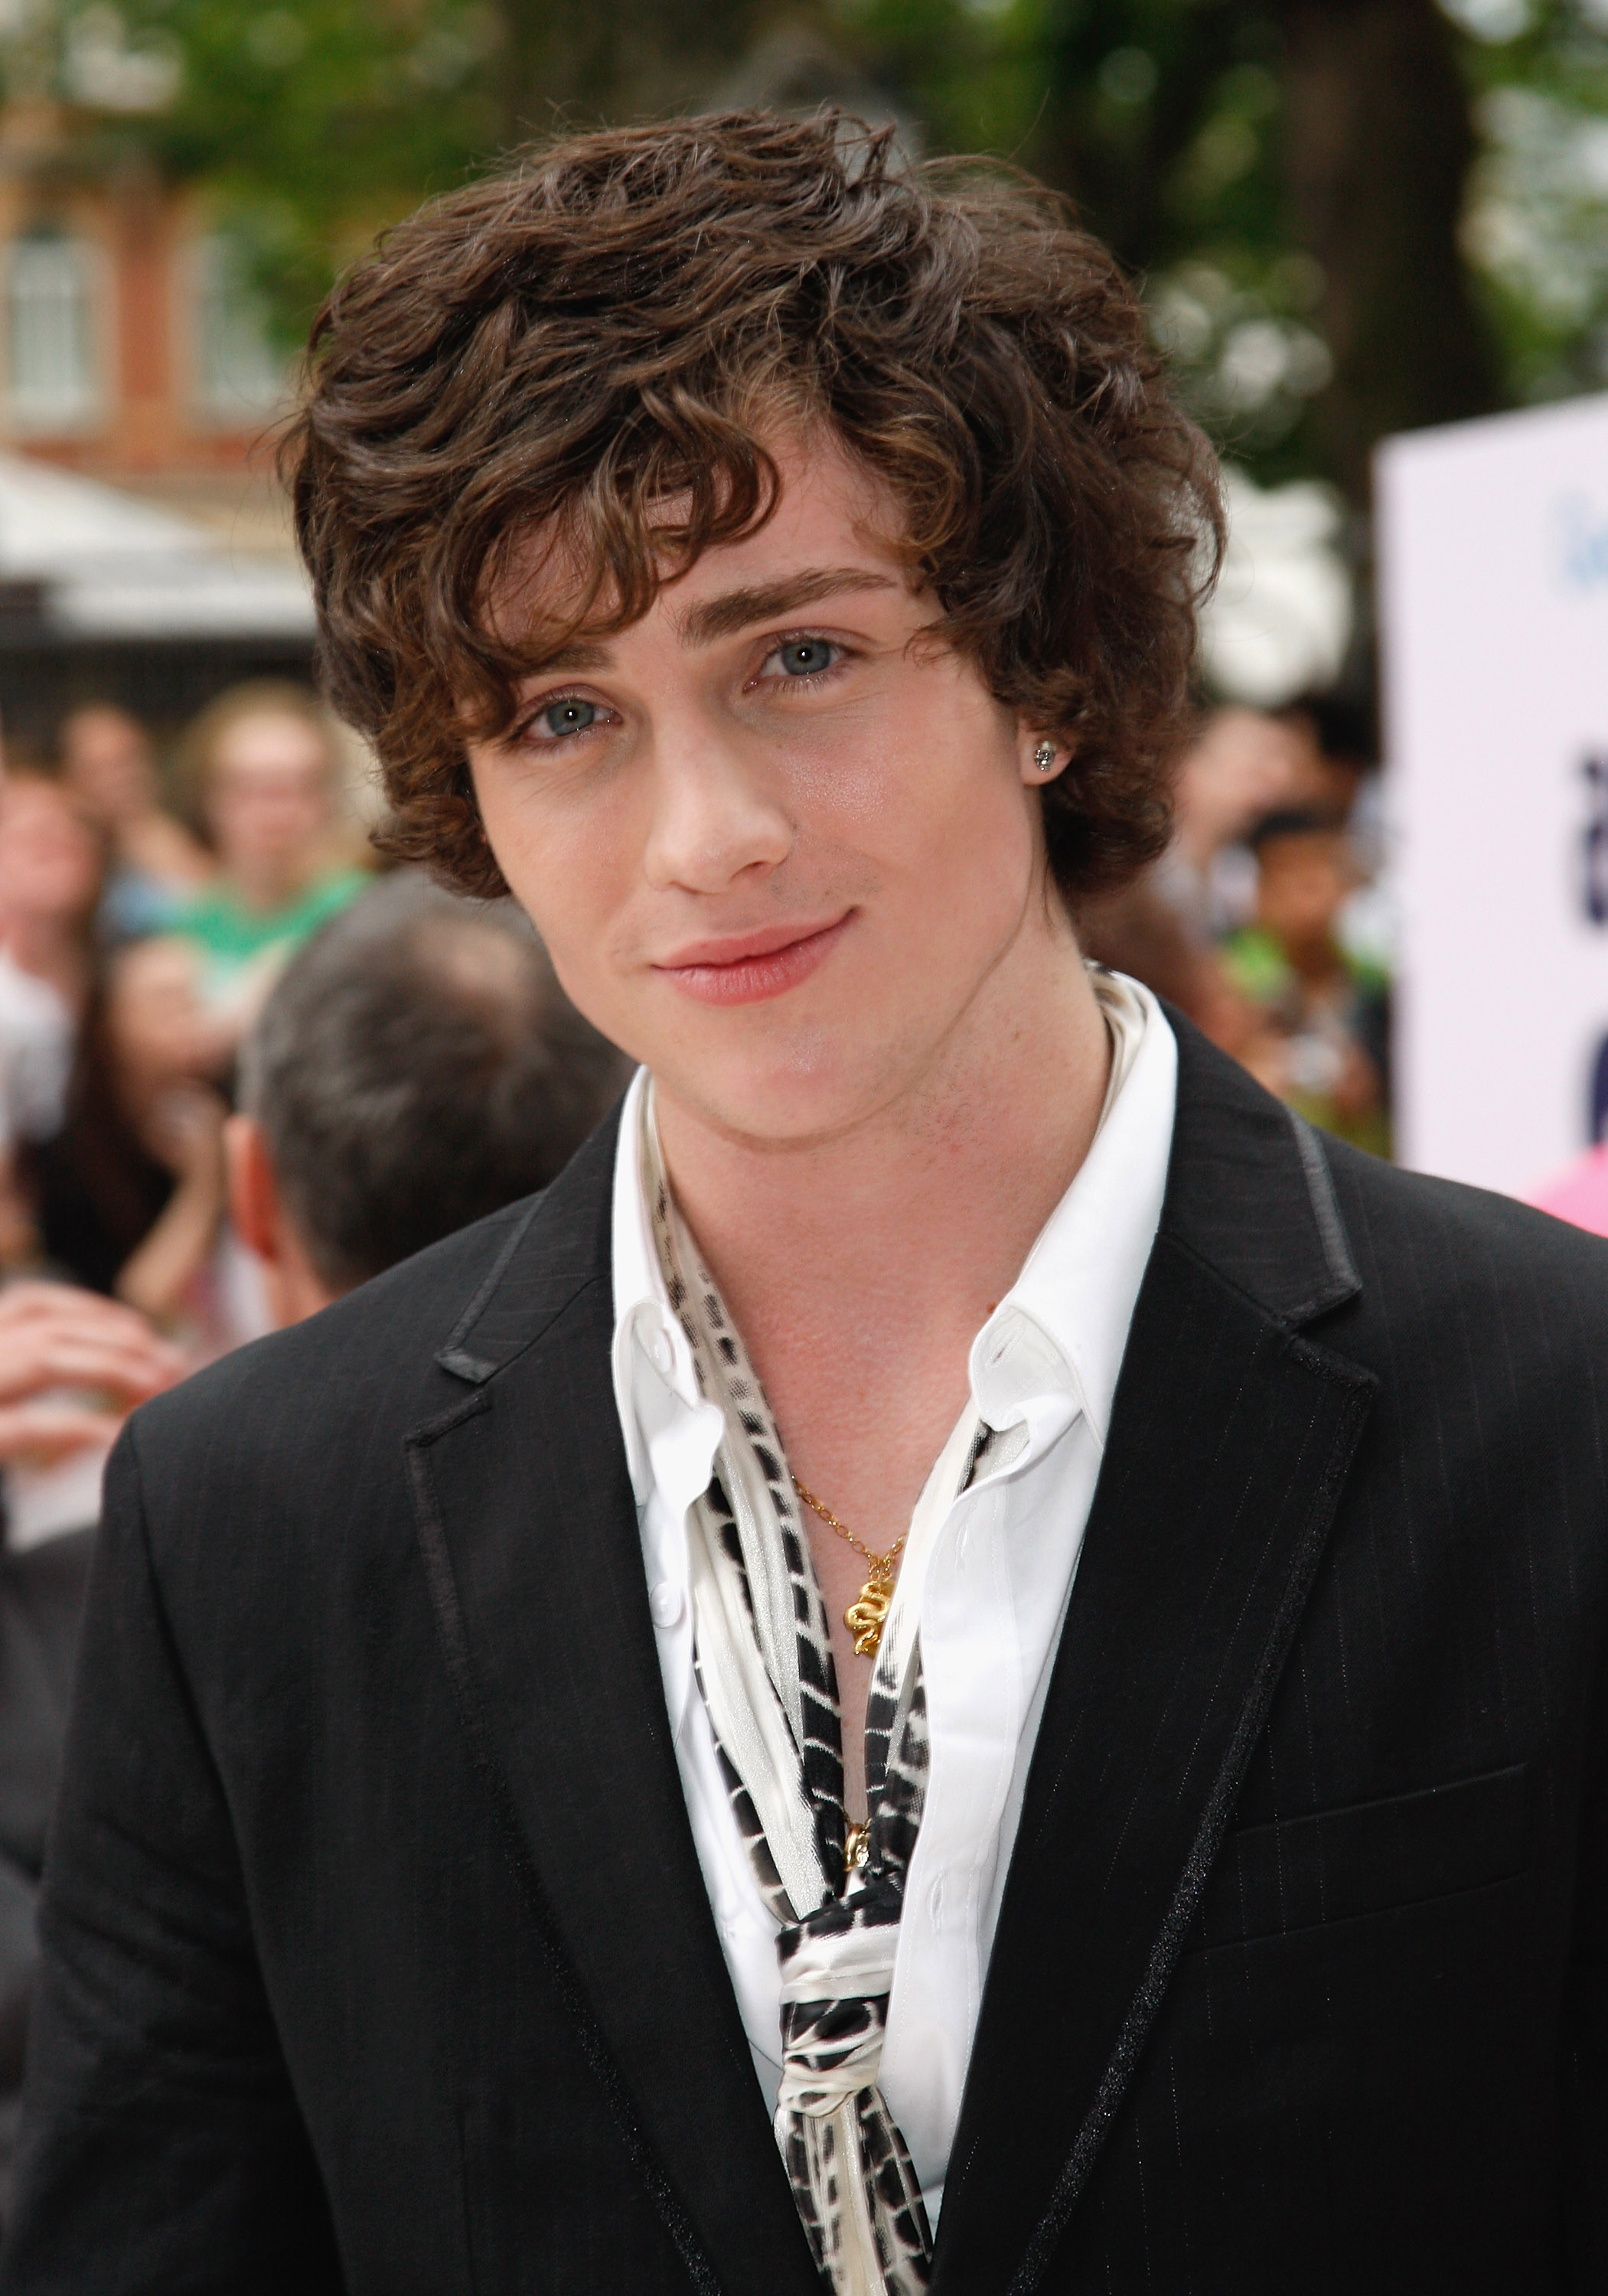 Aaron Johnson in London in 2008 | Source: Getty Images